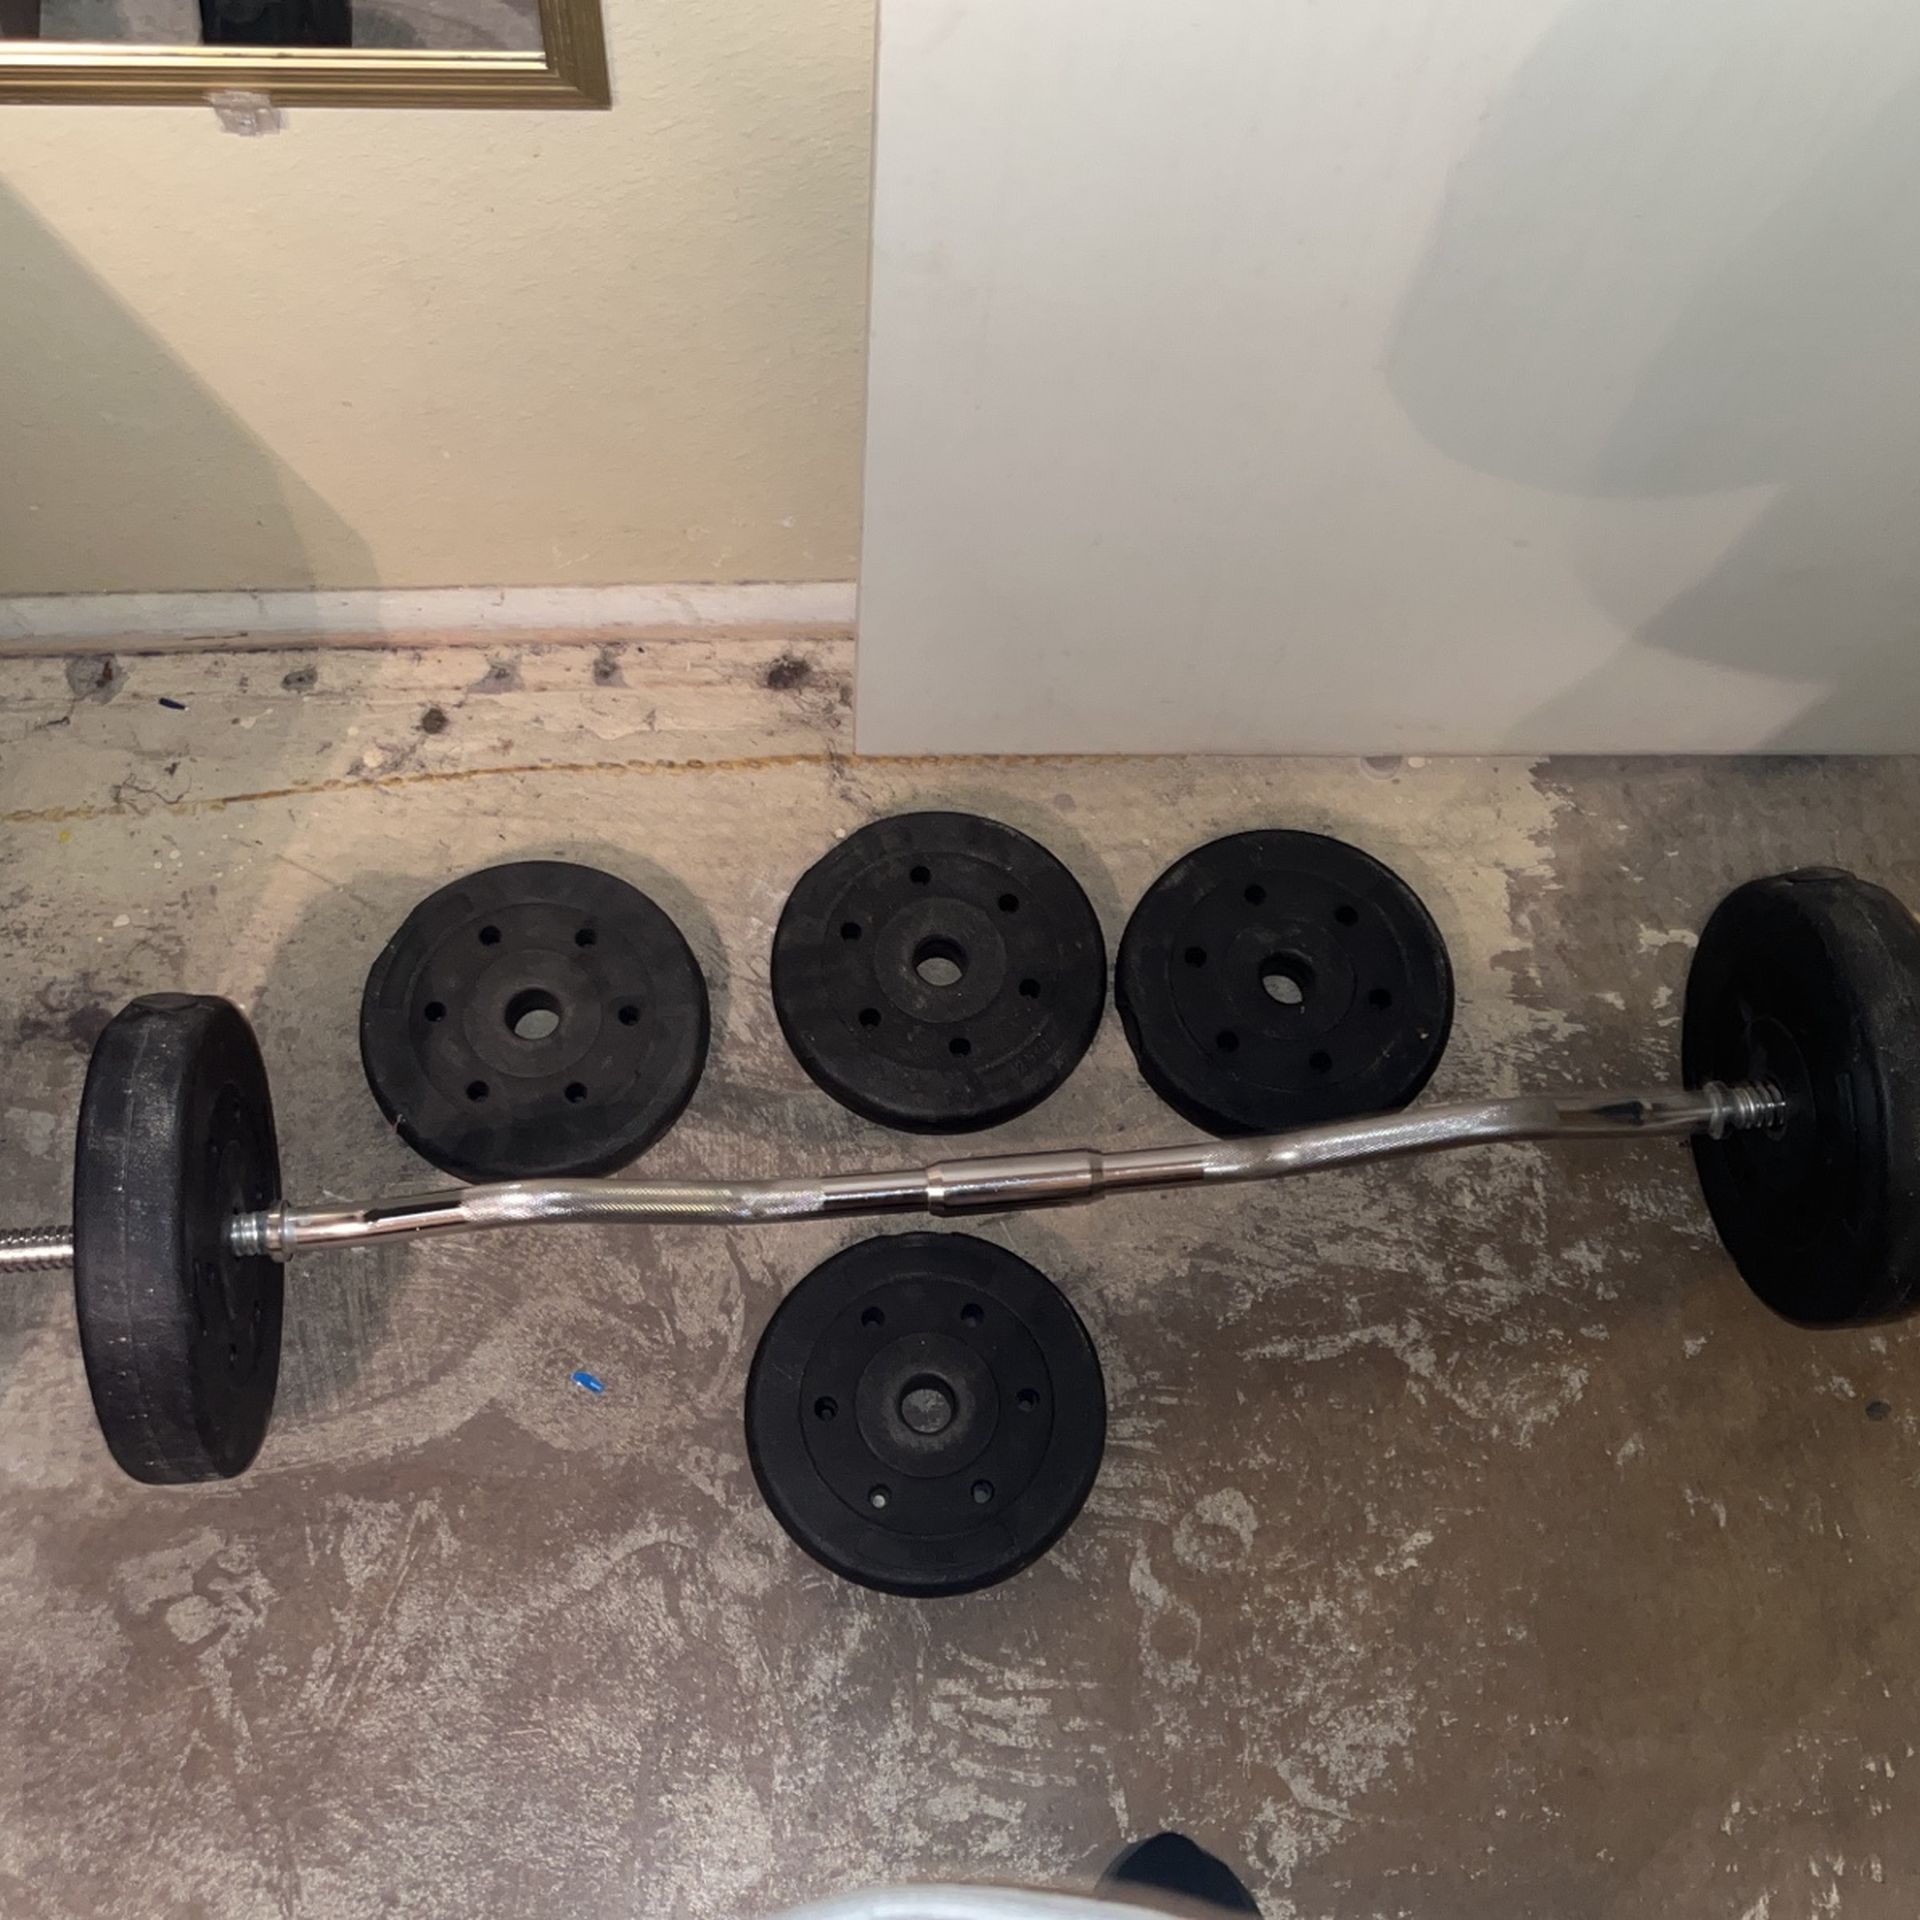 Curl Bar With 30 Pound Weights For 110 